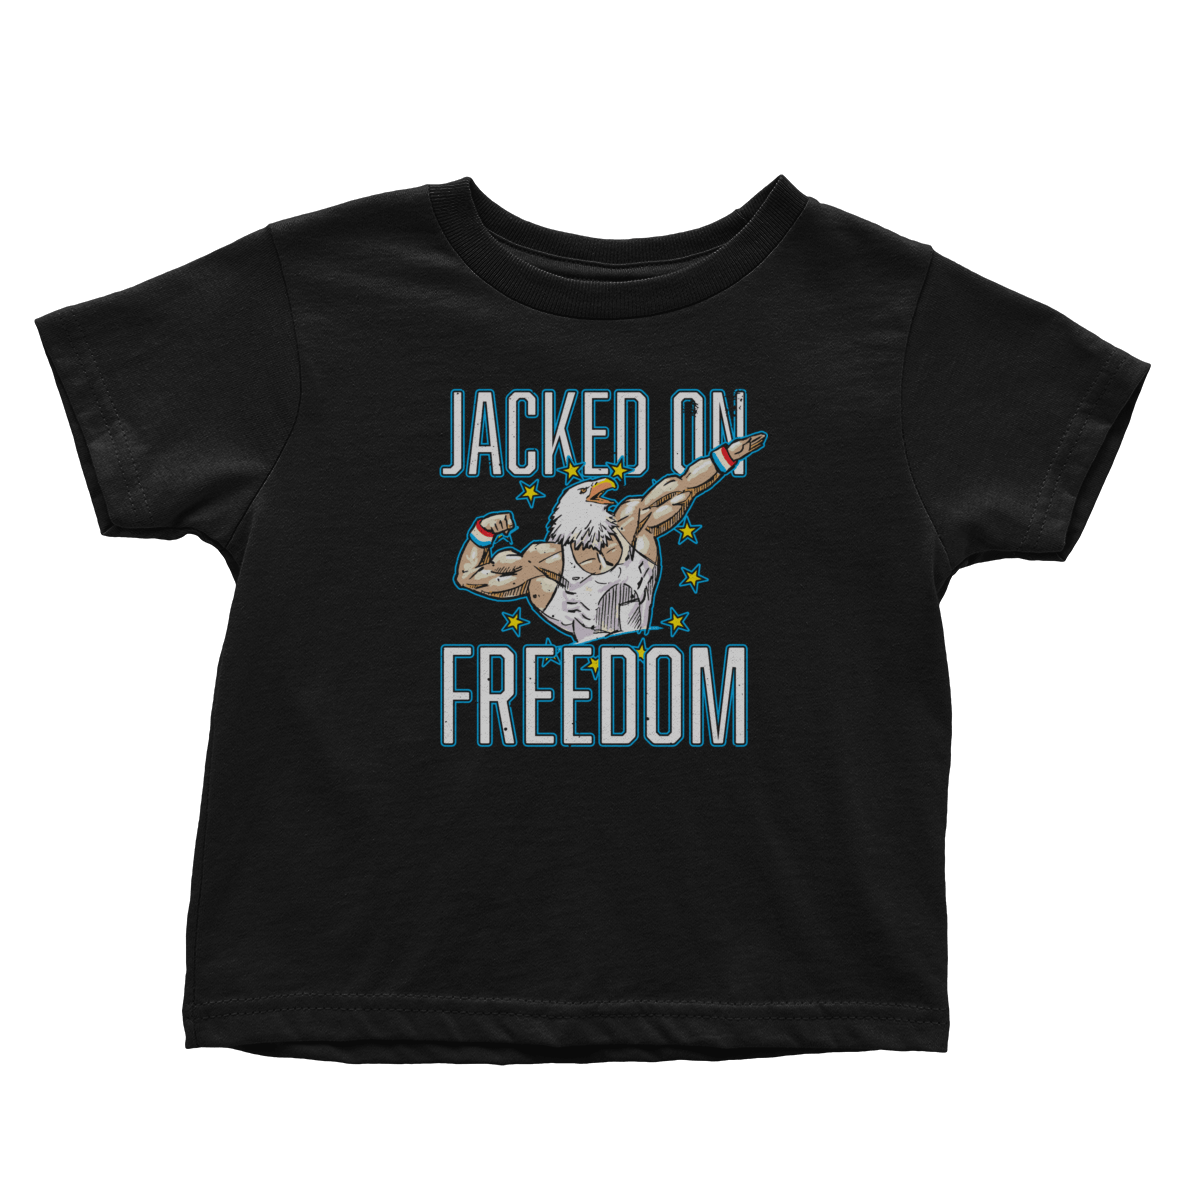 Apparel Premium Toddler Shirt / Black / 2T Jacked on Freedom - Toddlers